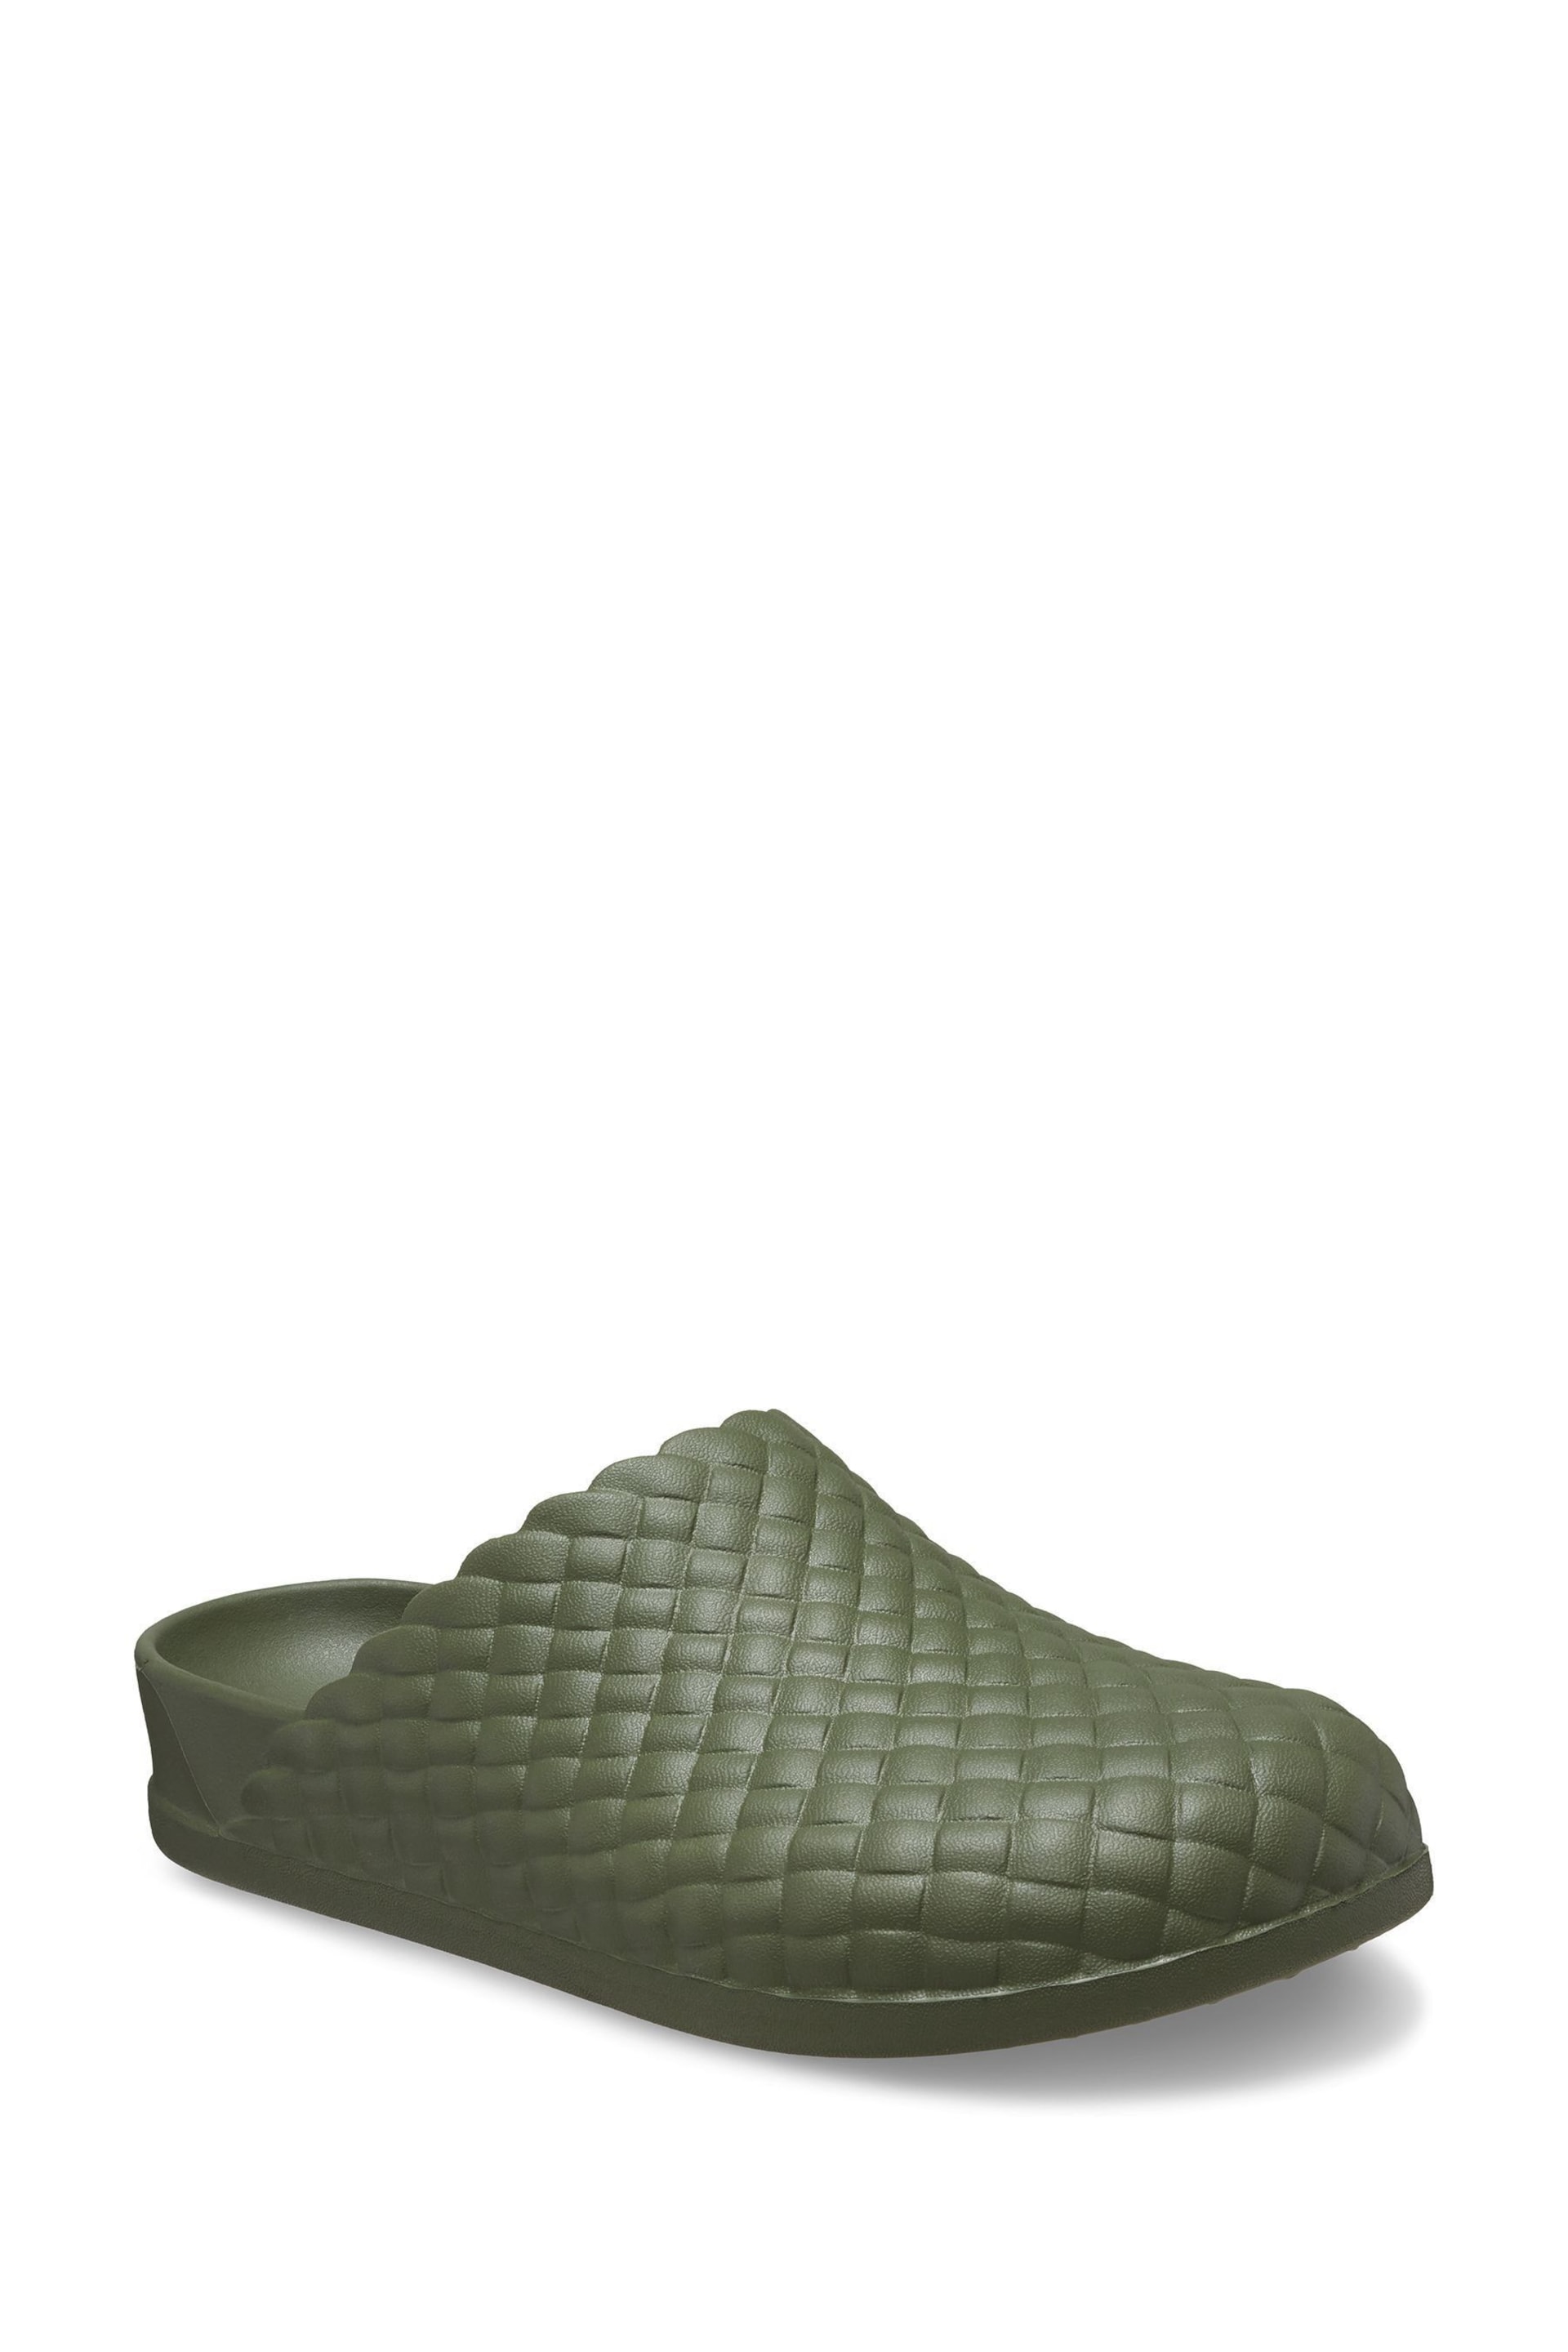 Crocs Dylan Woven Texture Clogs - Image 3 of 6